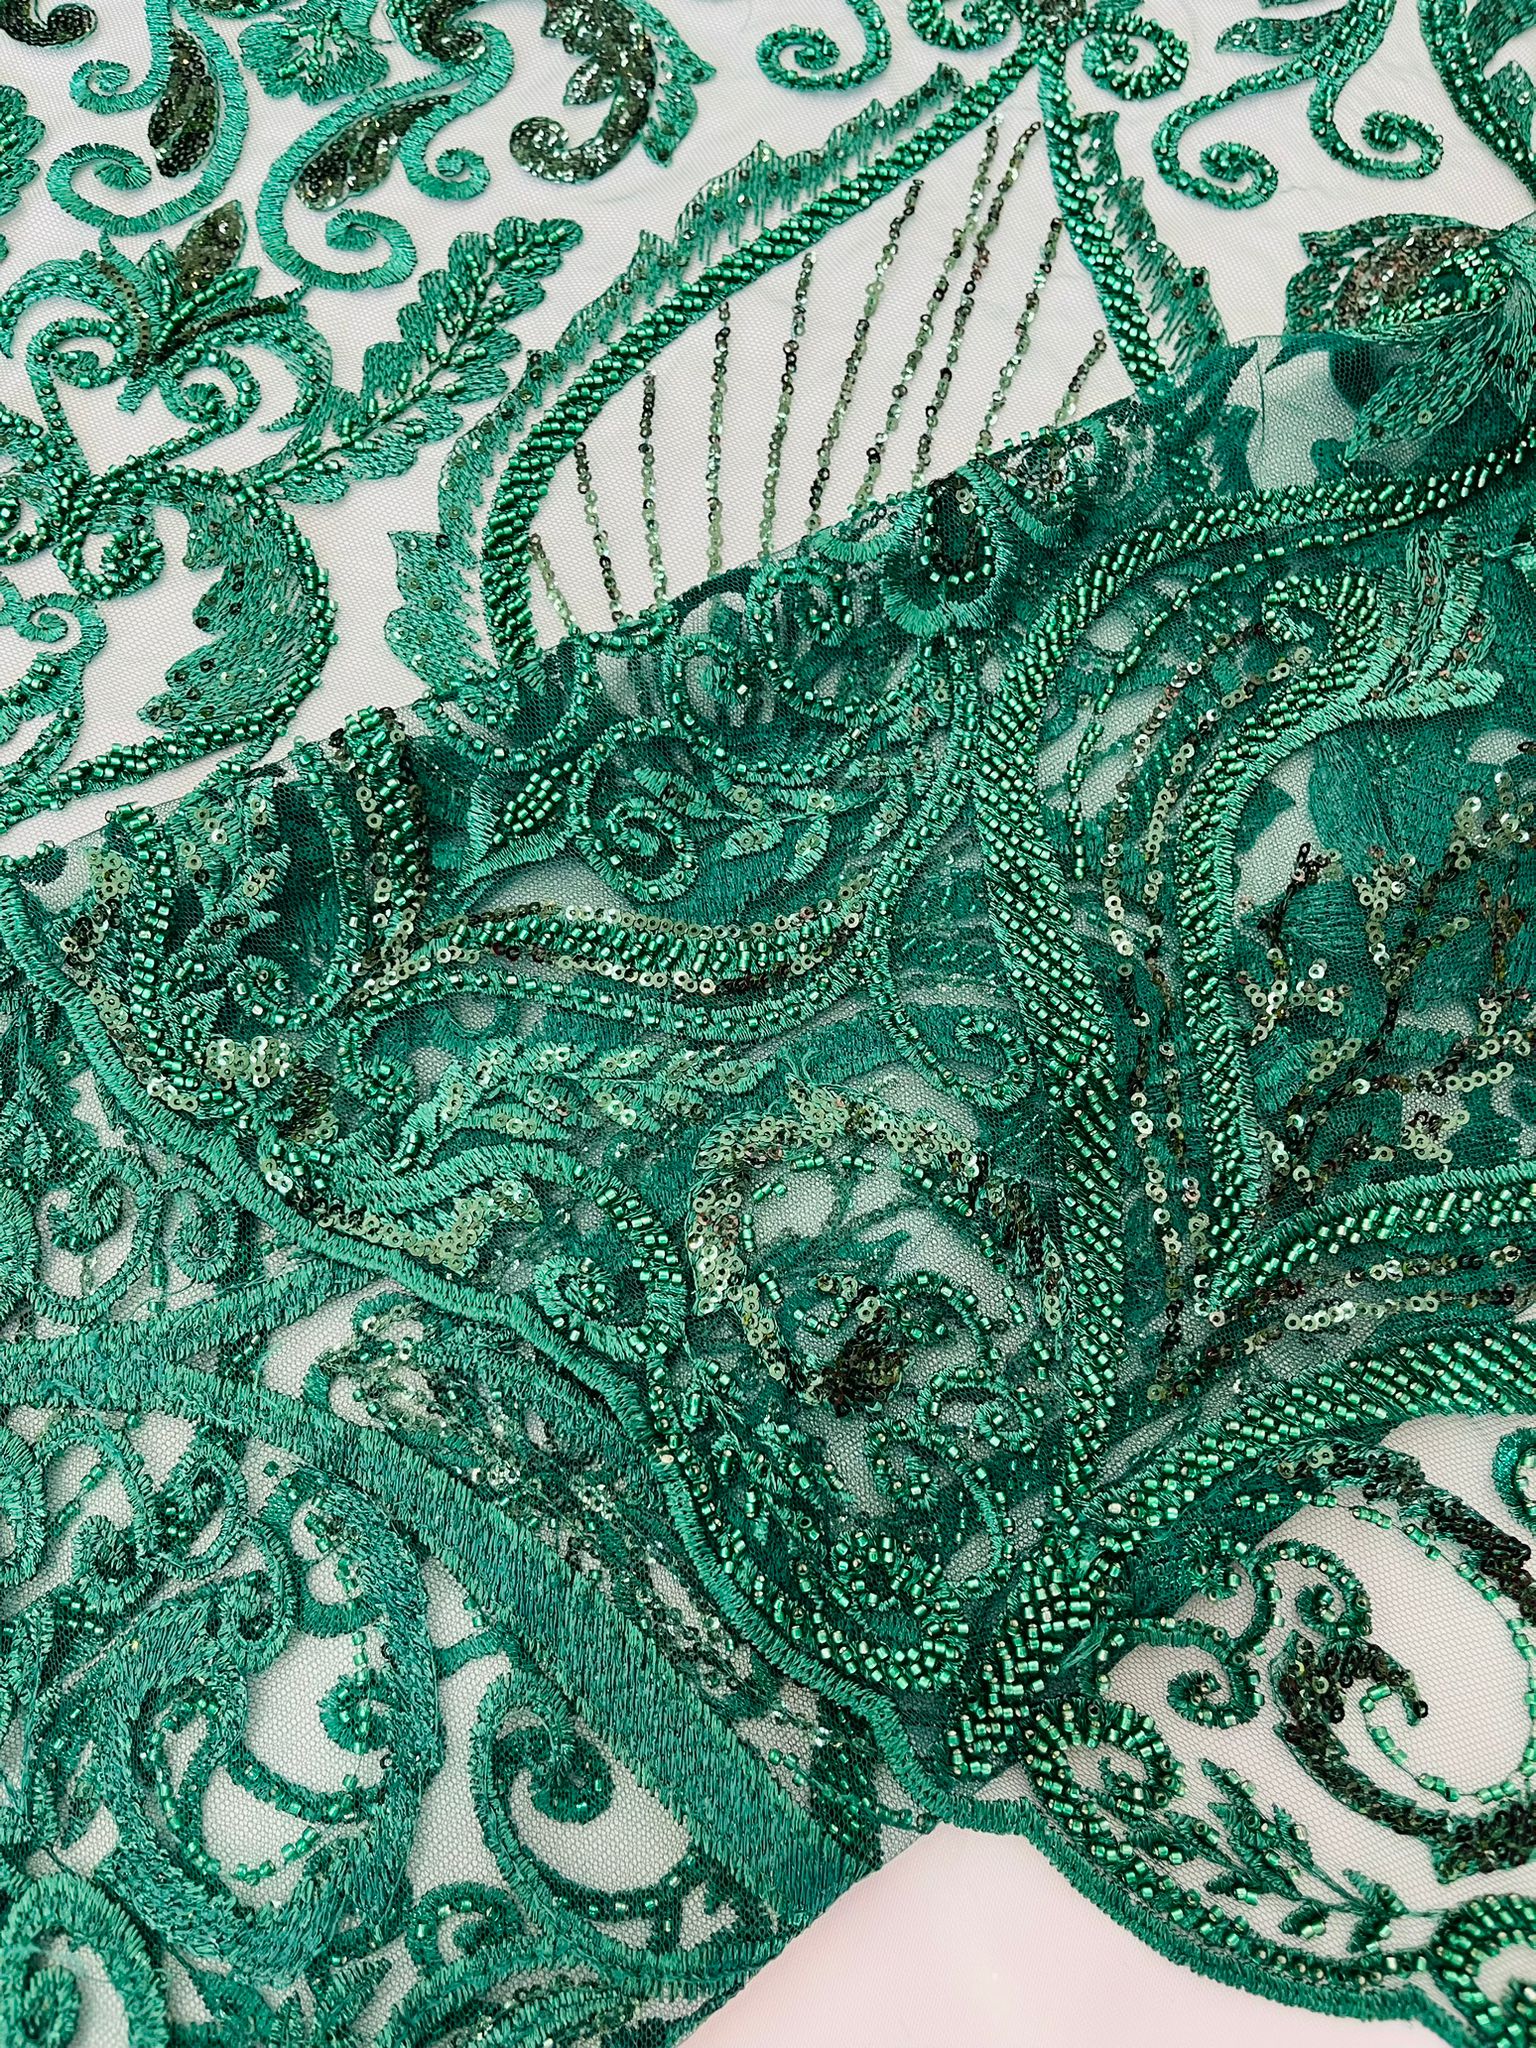 Dark Teal Lace Floral Netting Fabric Special Occasion Fabric By the Yard